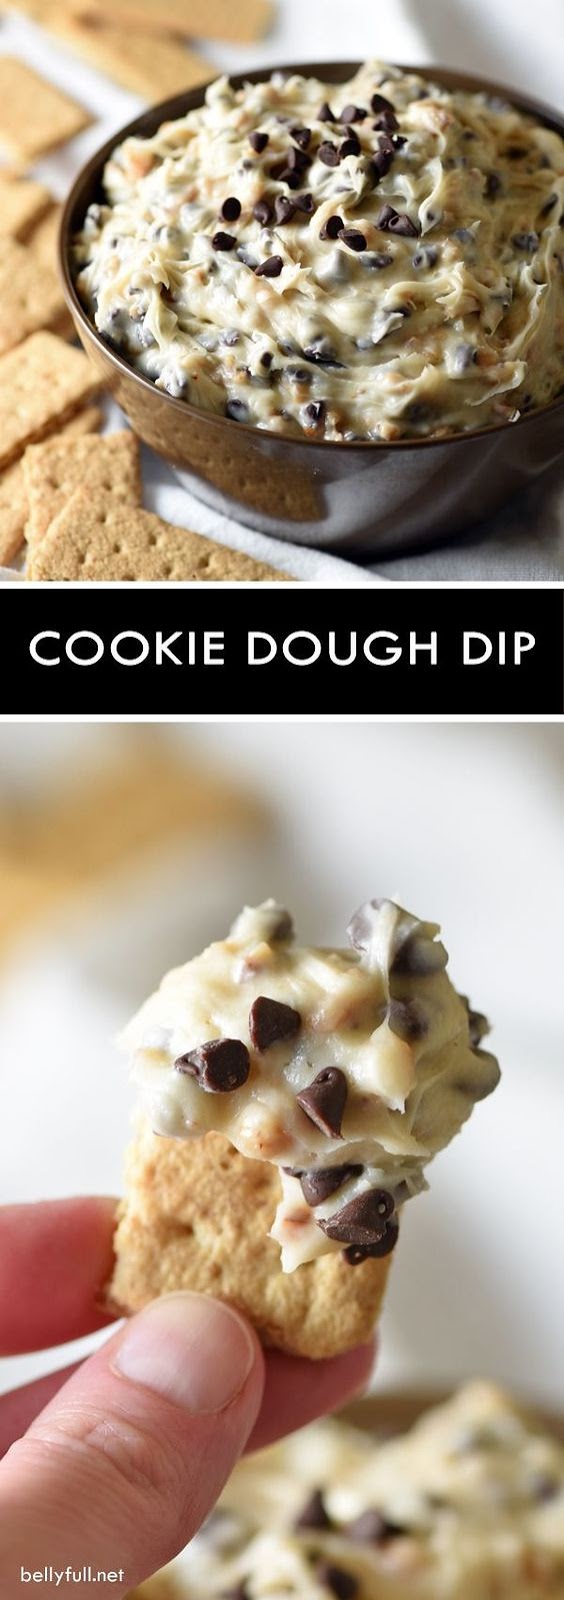 This cookie dough dip is best cold dessert appetizer, made with chocolate chips, toffee bits, and no egg. Whip up a batch in just 10 minutes!